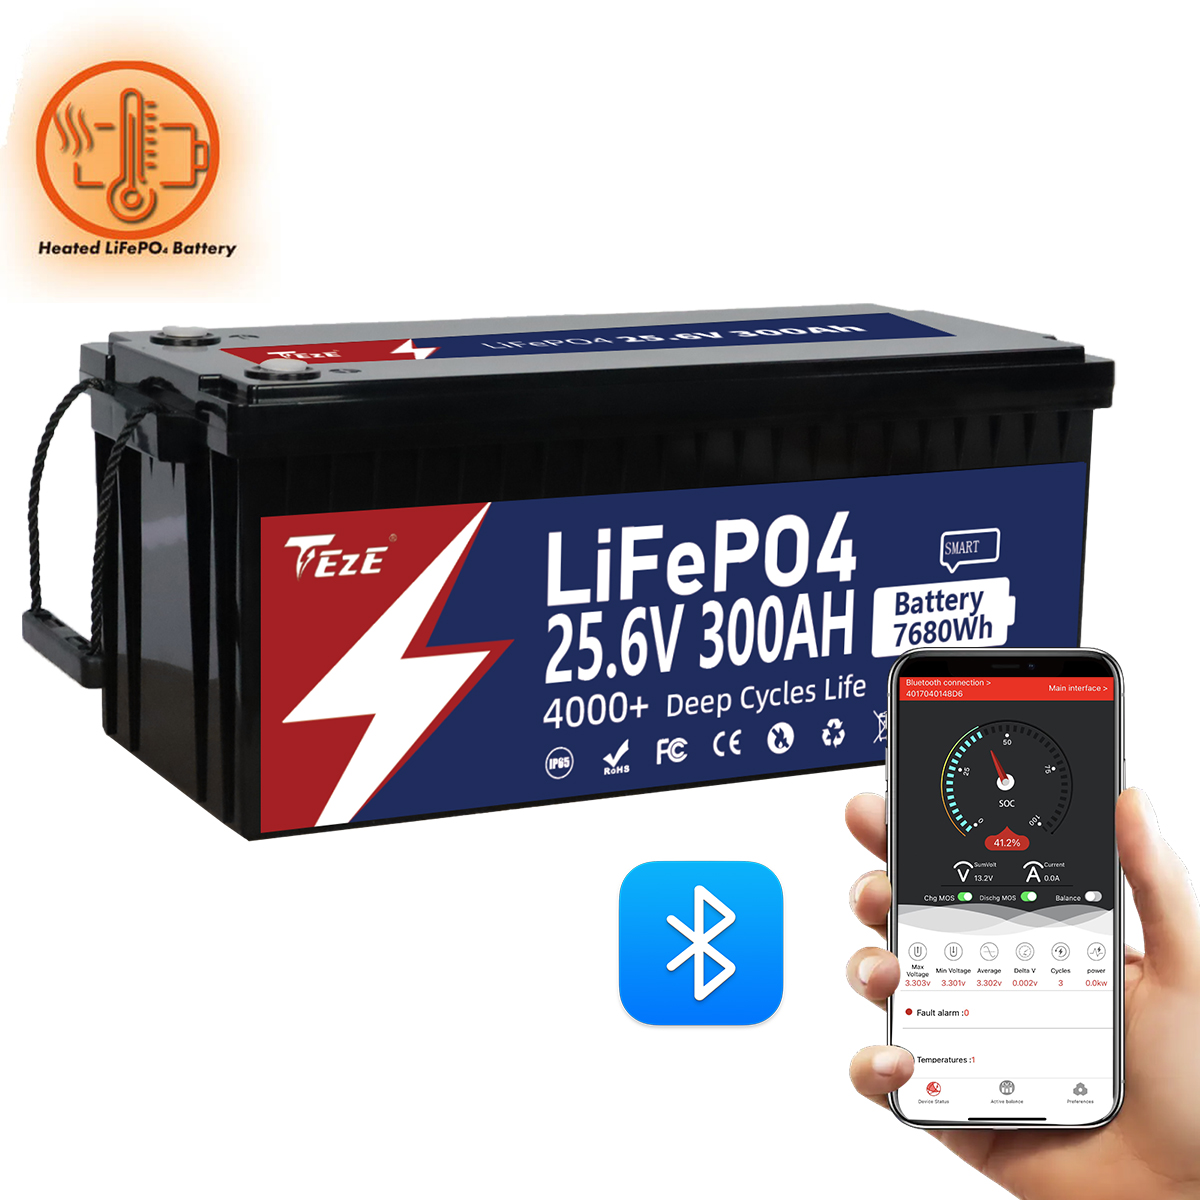 TezePower 25.6V 300Ah LiFePO4 Battery with Bluetooth, Self-heating and Active Balancer, Built-in 200A Daly BMS(Bluetooth Built-in Version)-TezePower